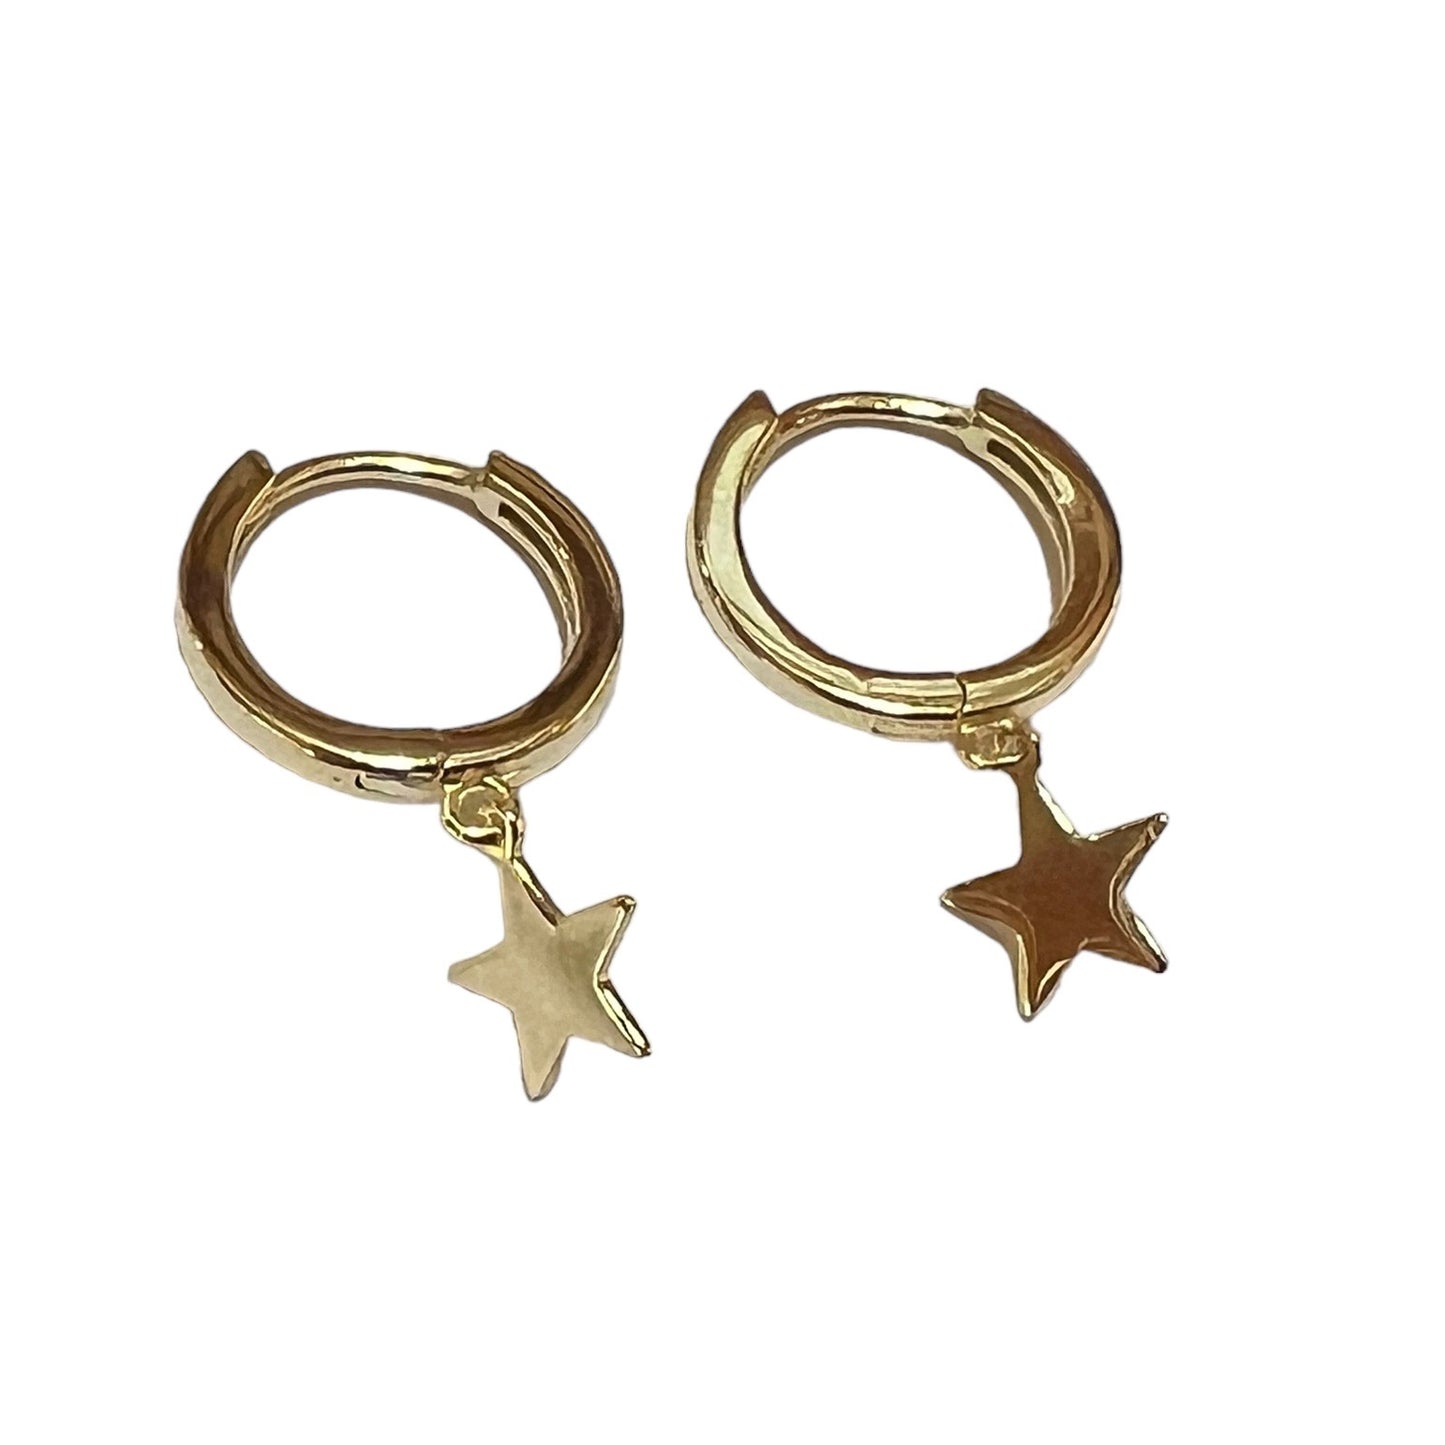 Earring - Star Huggie, Gold Plated